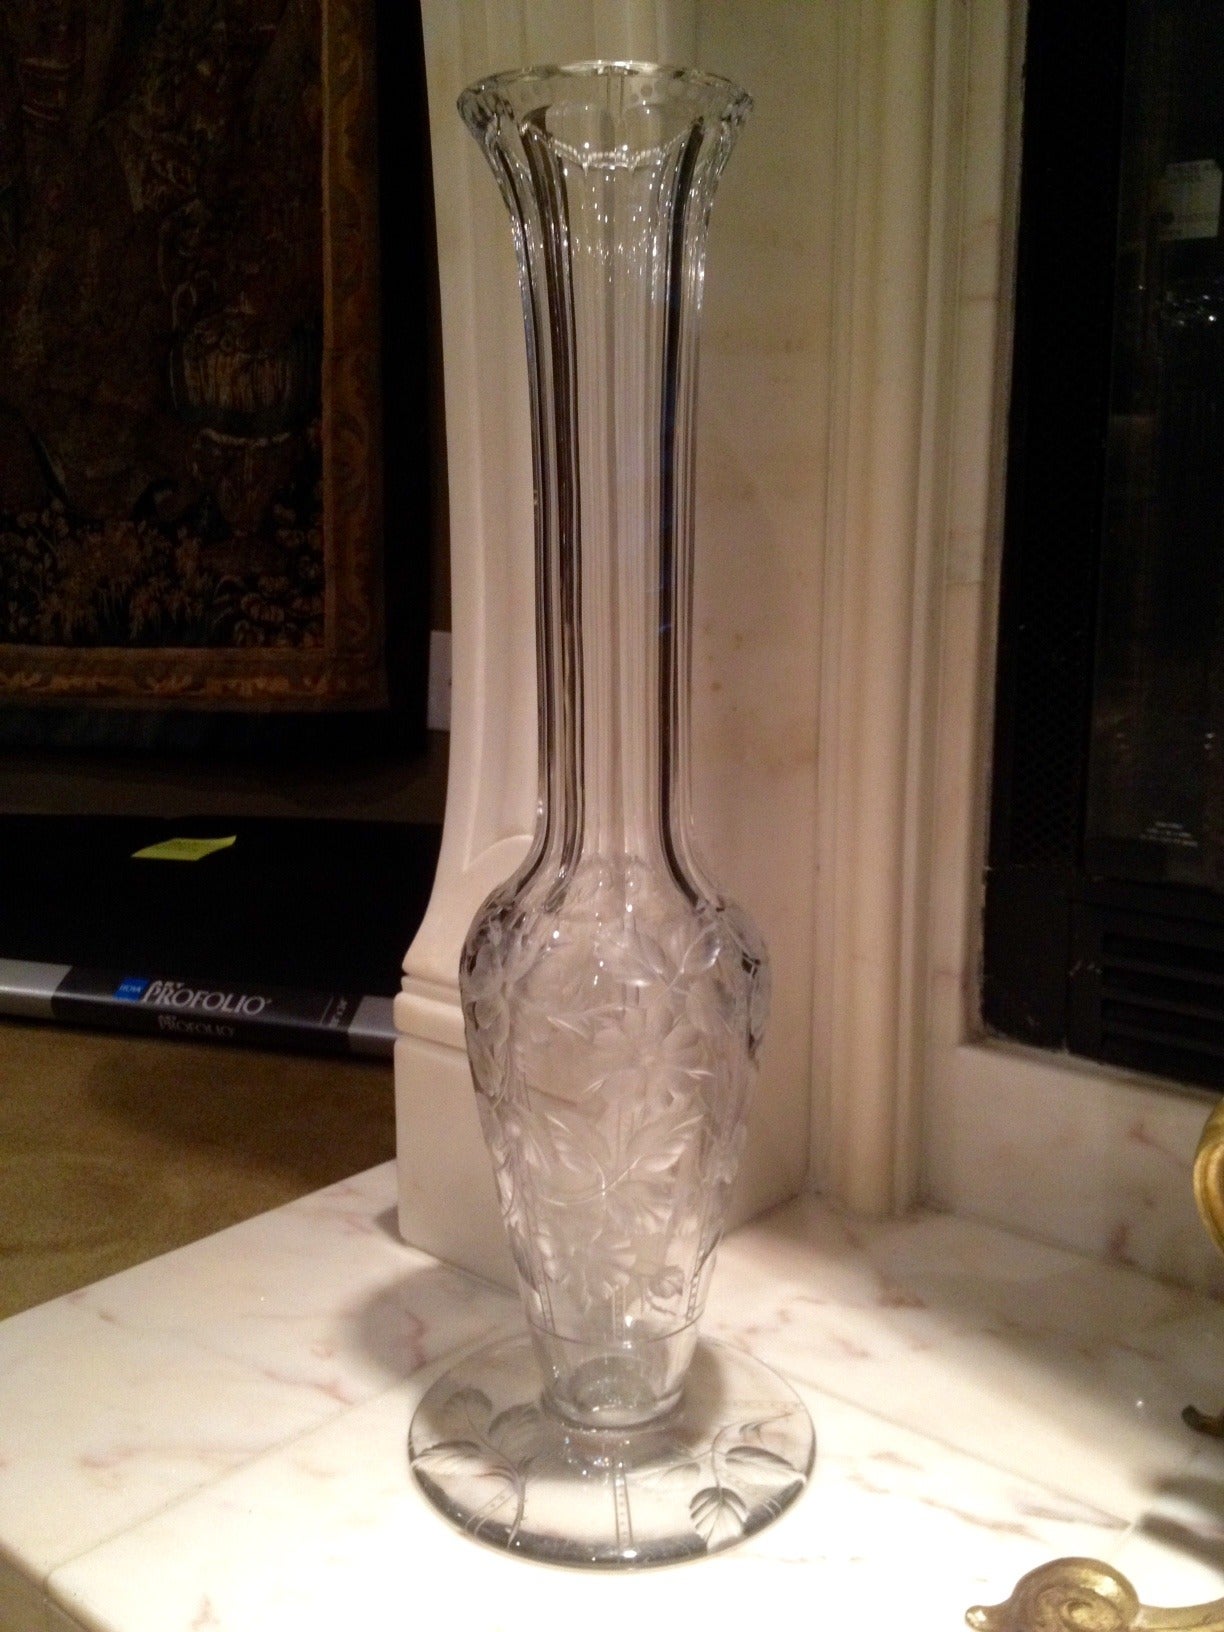 Monumental American Brilliant Period Cut Glass Vase By Tuthill Circa 1900 At 1stdibs